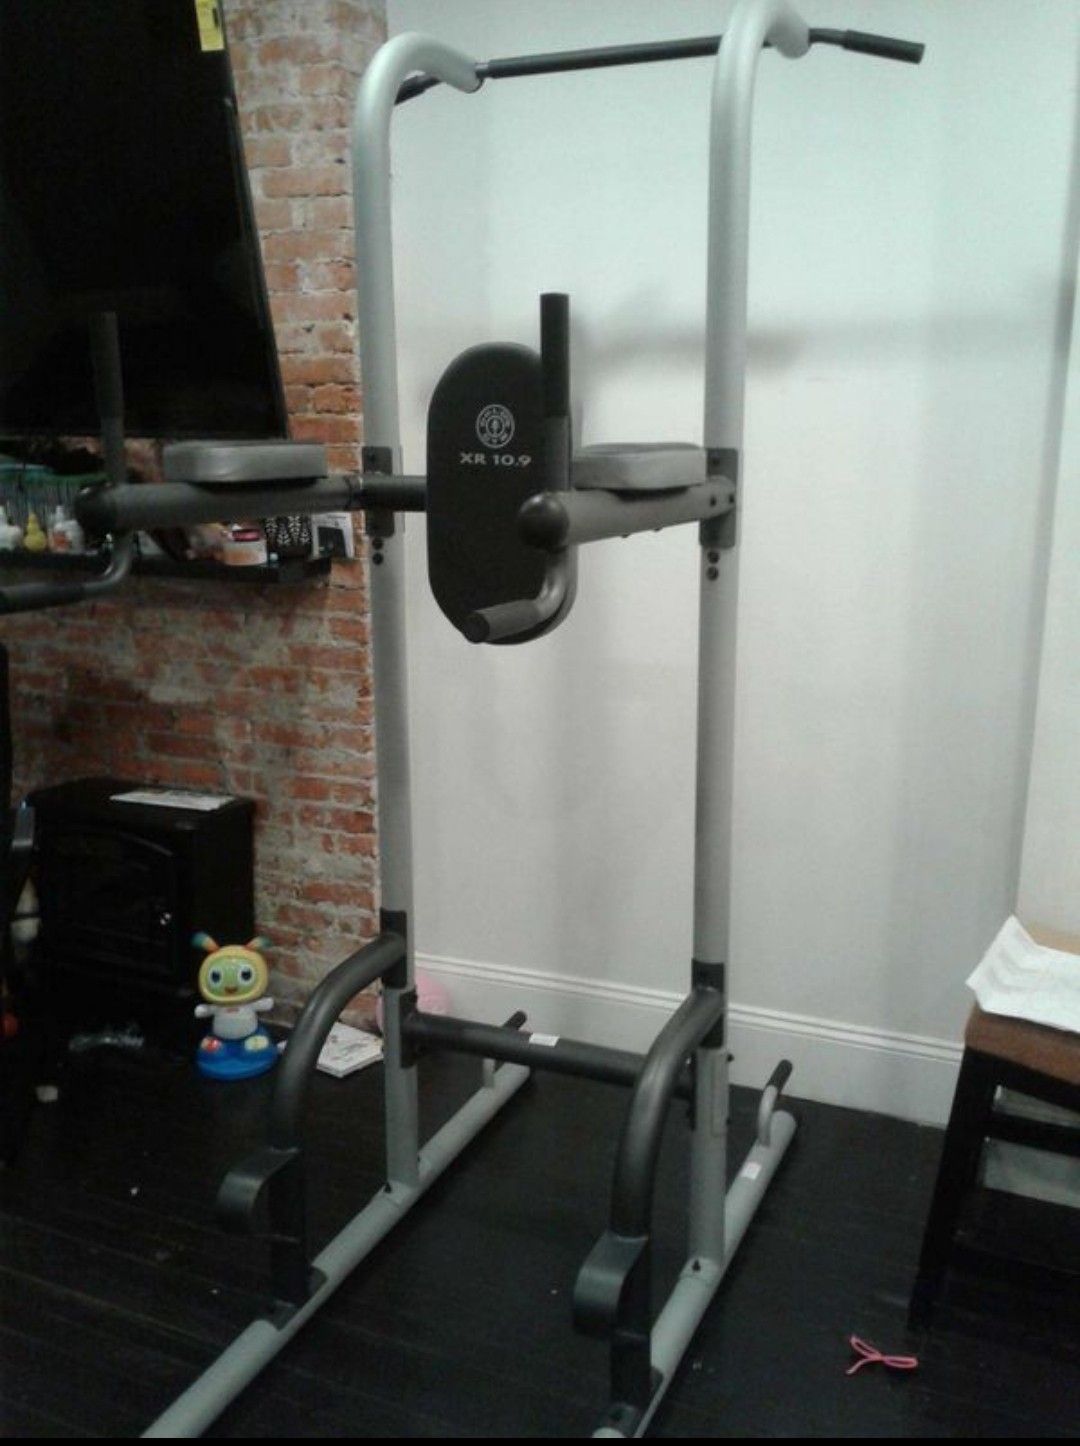 Gold's Gym XR 10.9 Power Tower Ab workout machine